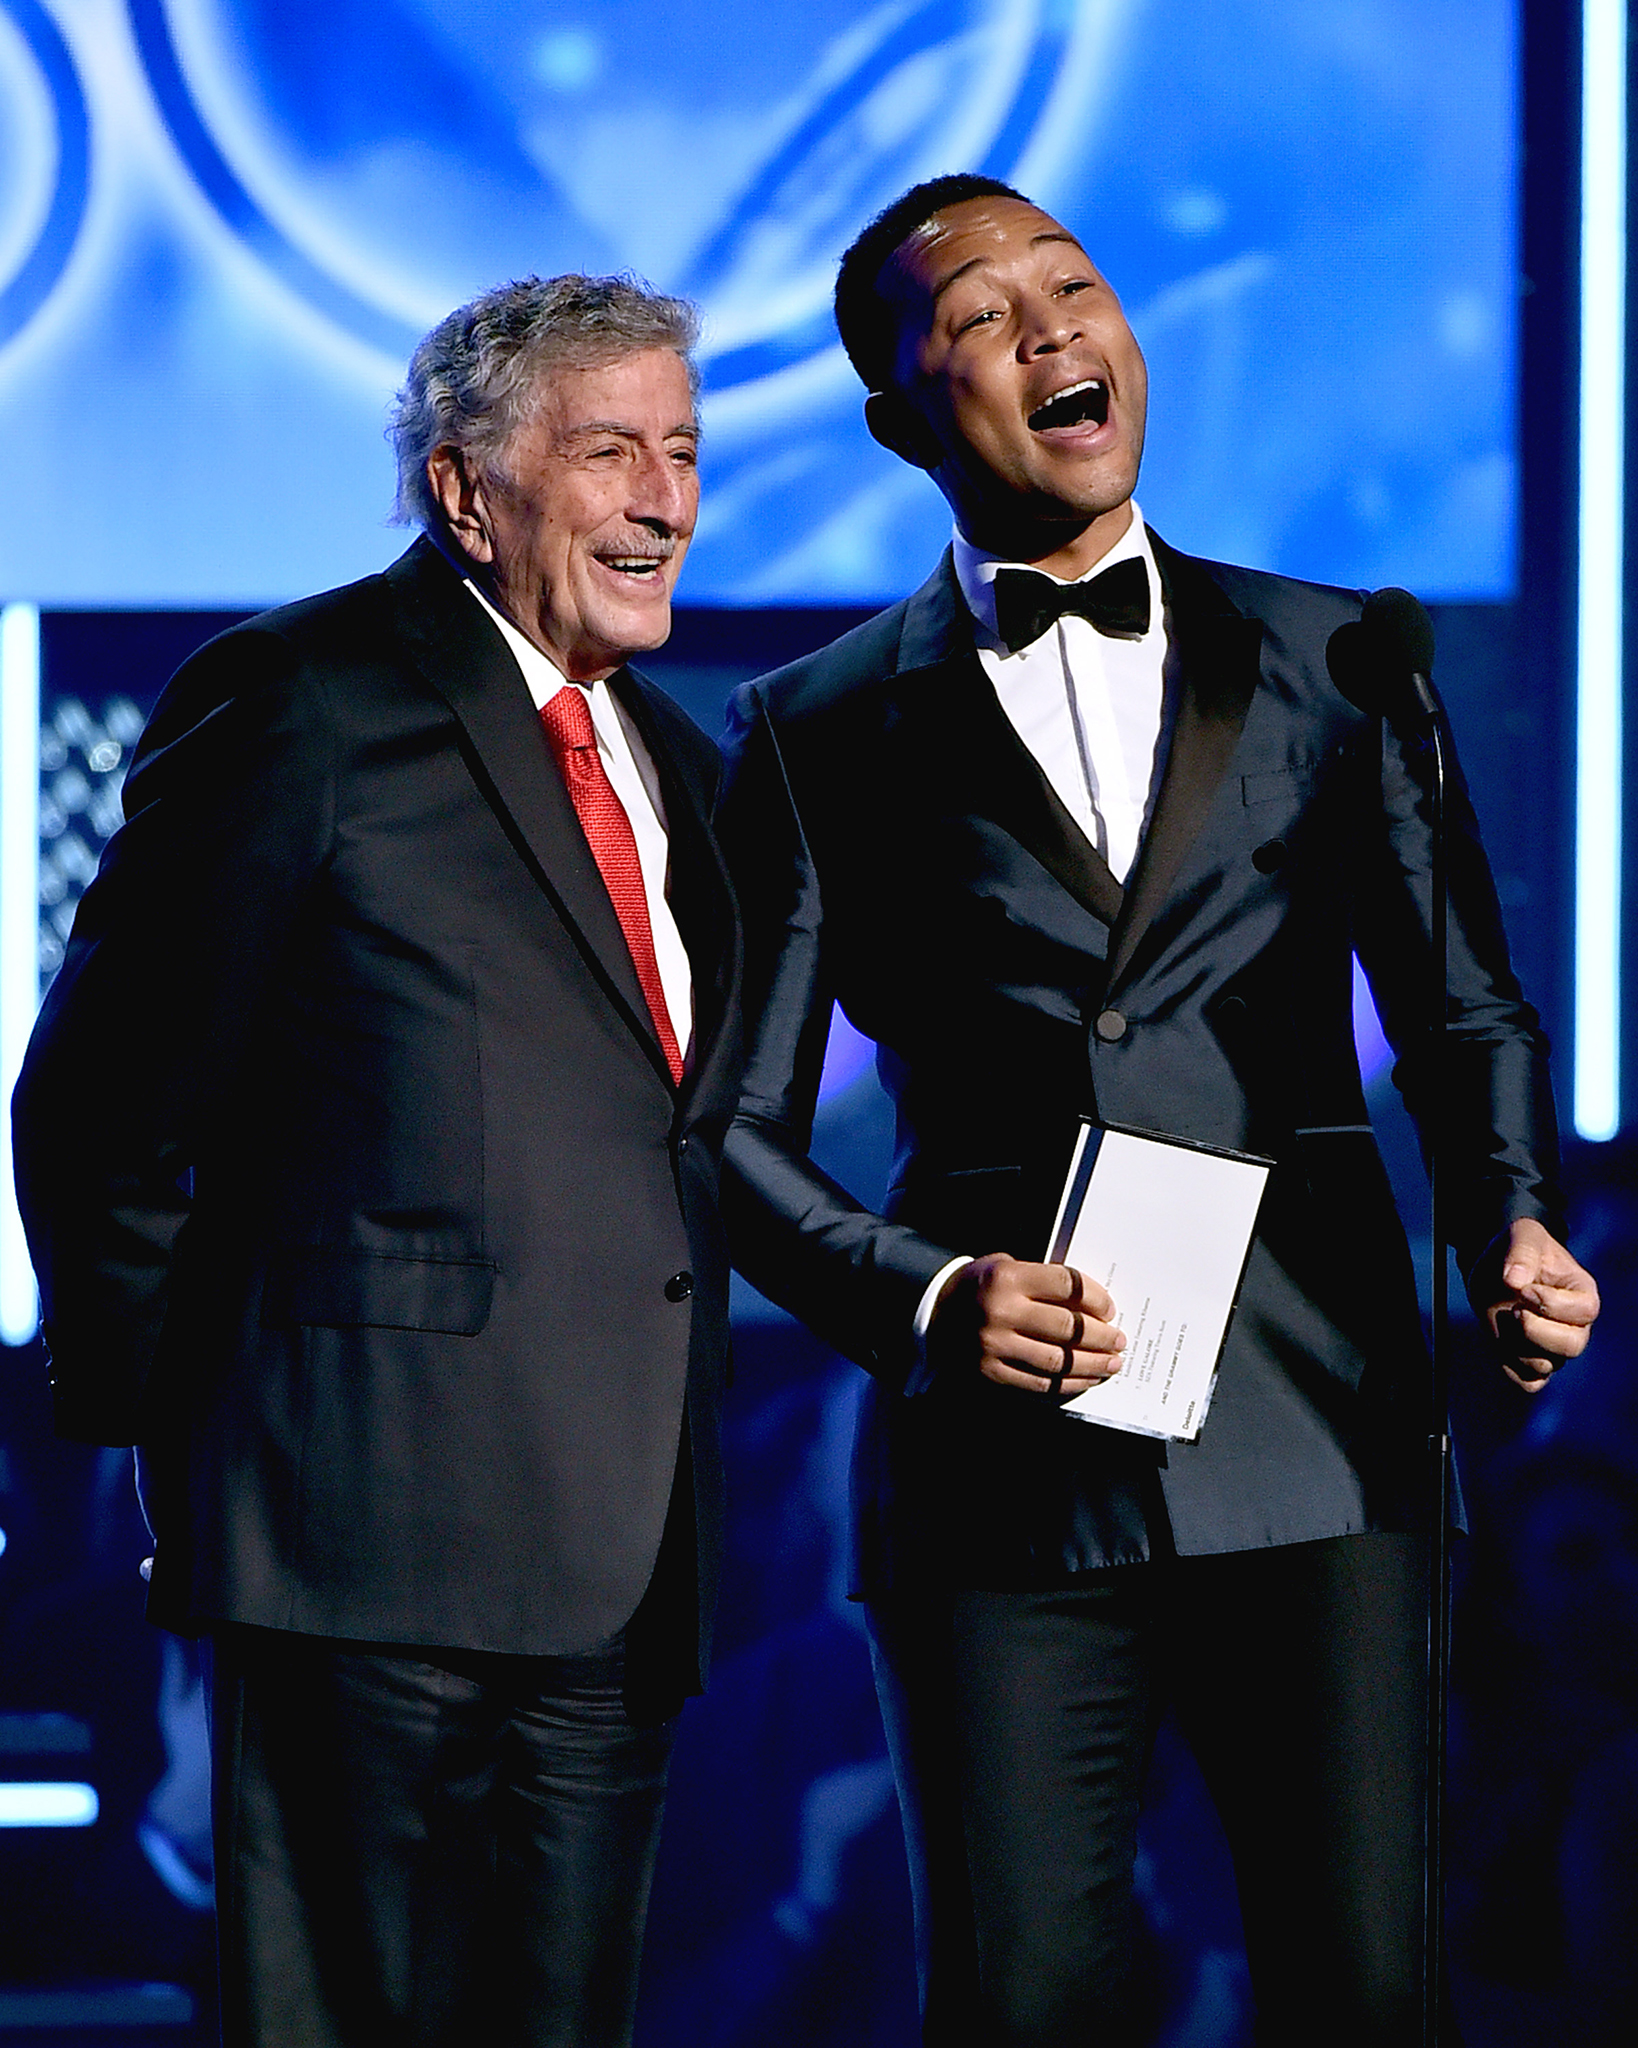 Recording artists Tony Bennett and John Legend speak onstage during the 60th Annual Grammy Awards at Madison Square Garden on Jan. 28, 2018 in New York City. Theo Wargo—WireImage/Getty Images (Theo Wargo—WireImage/Getty Images)